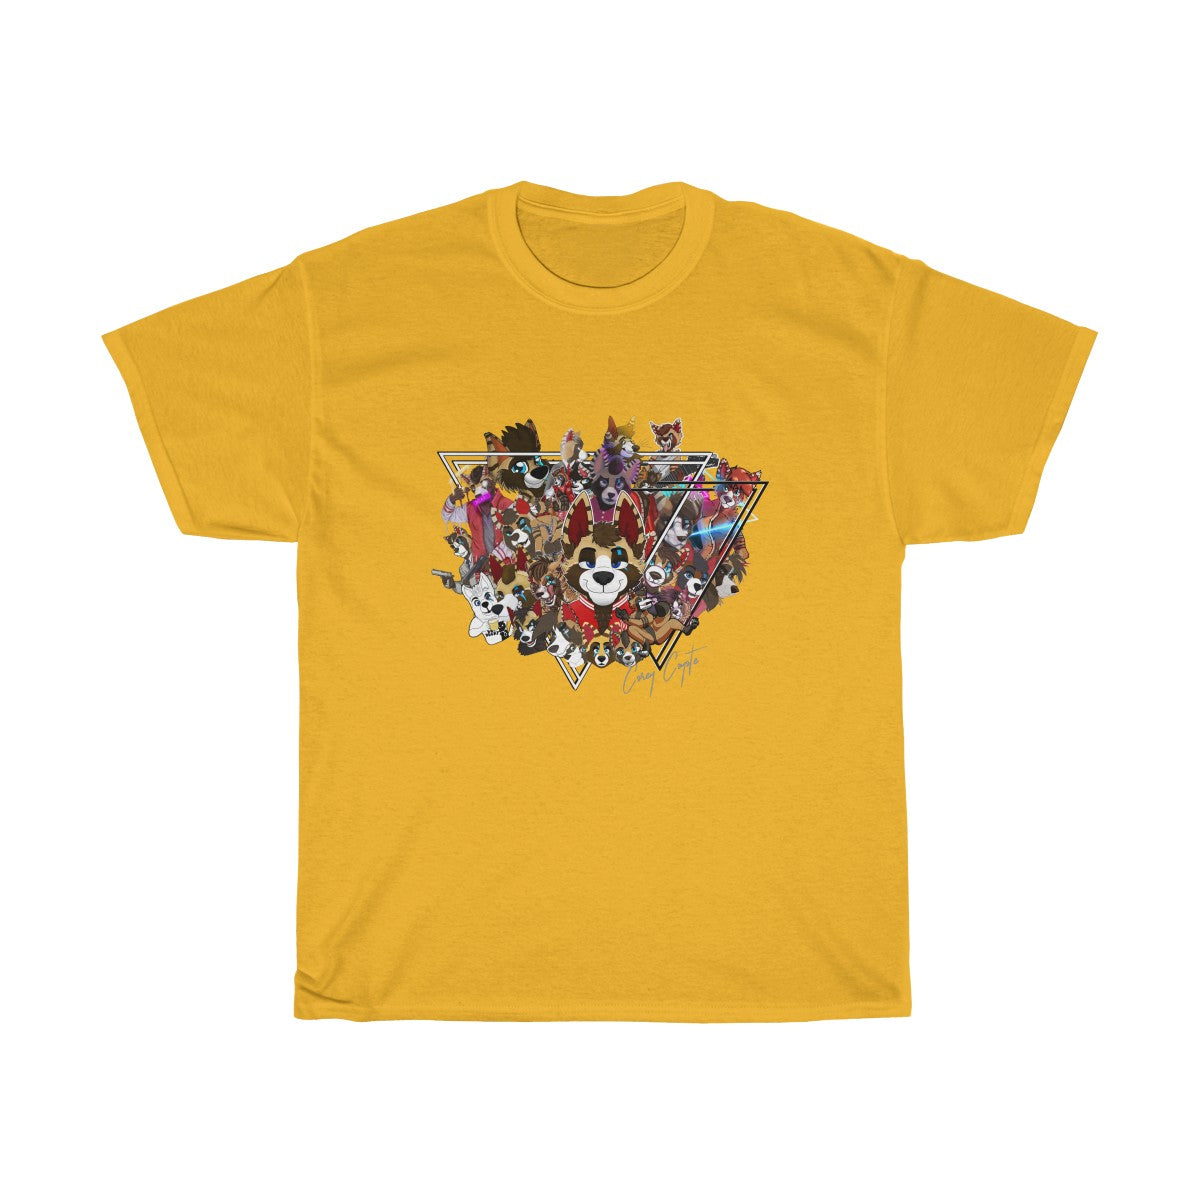 For The Fans - T-Shirt T-Shirt Corey Coyote Gold S 